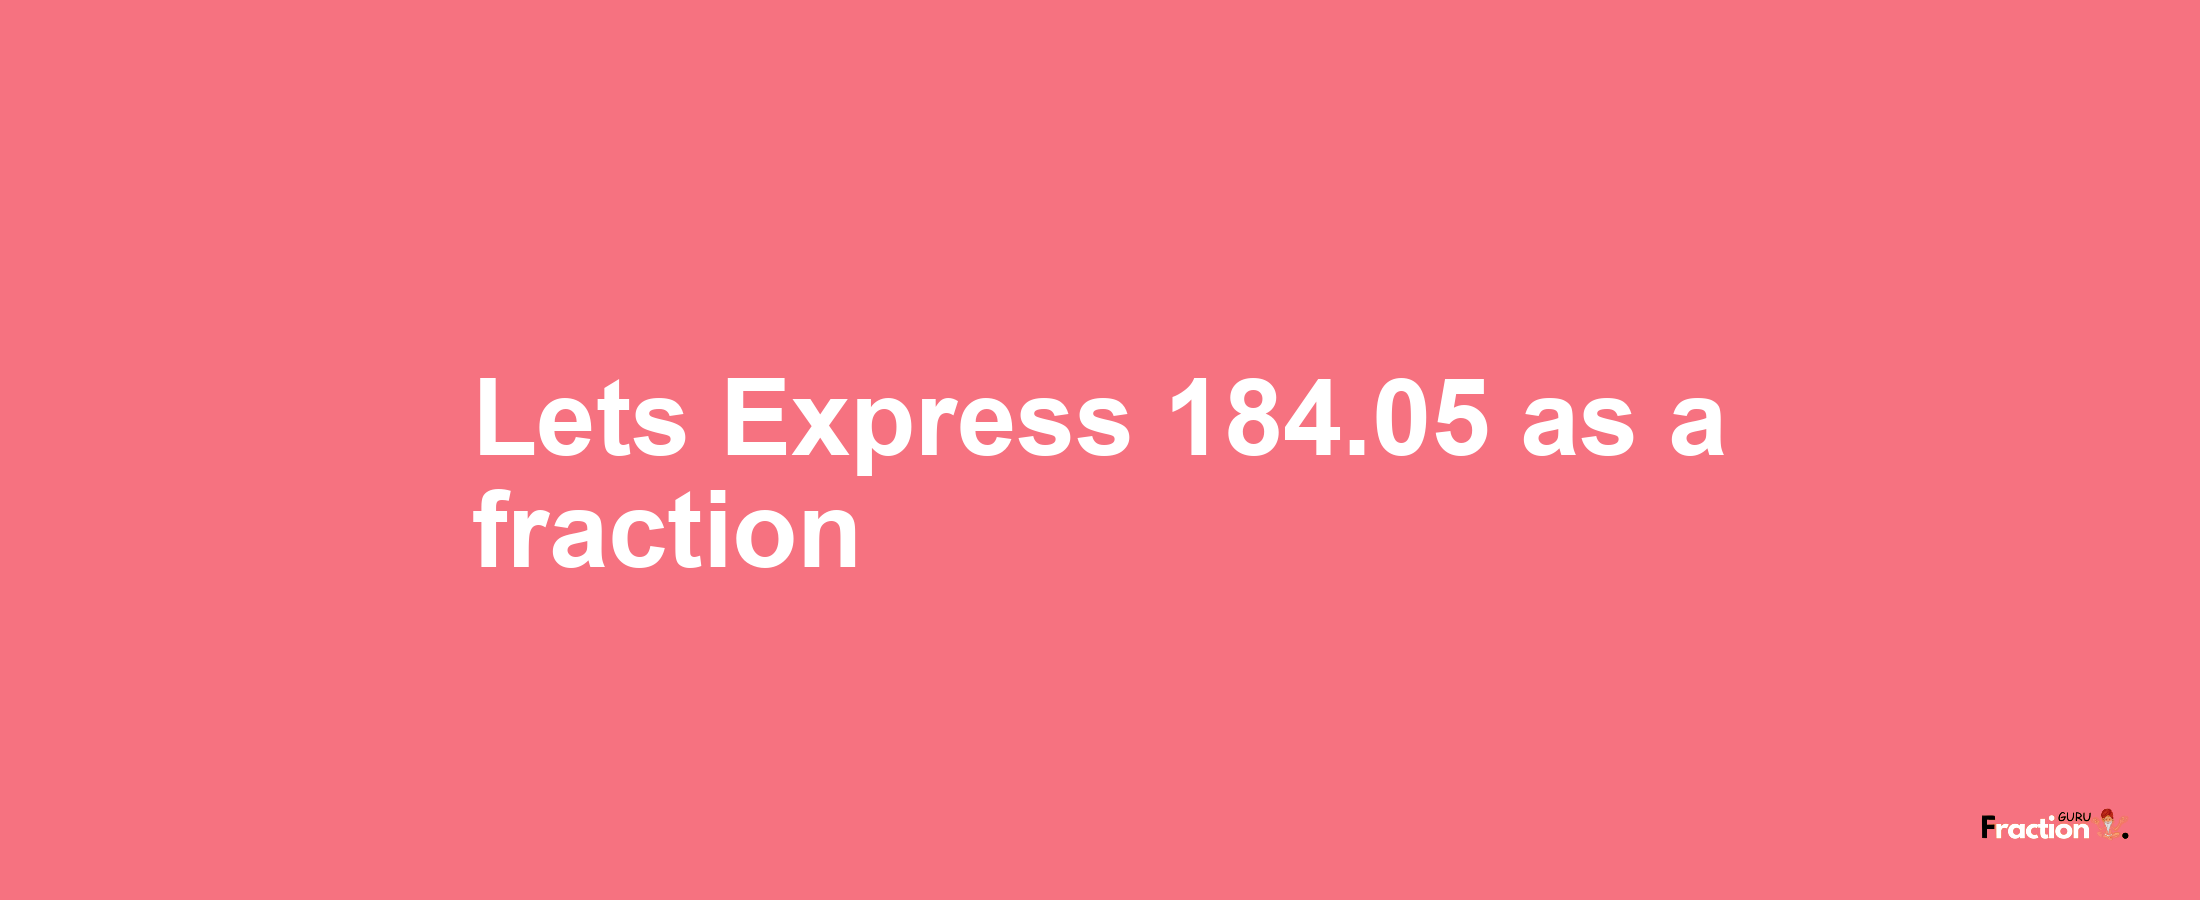 Lets Express 184.05 as afraction